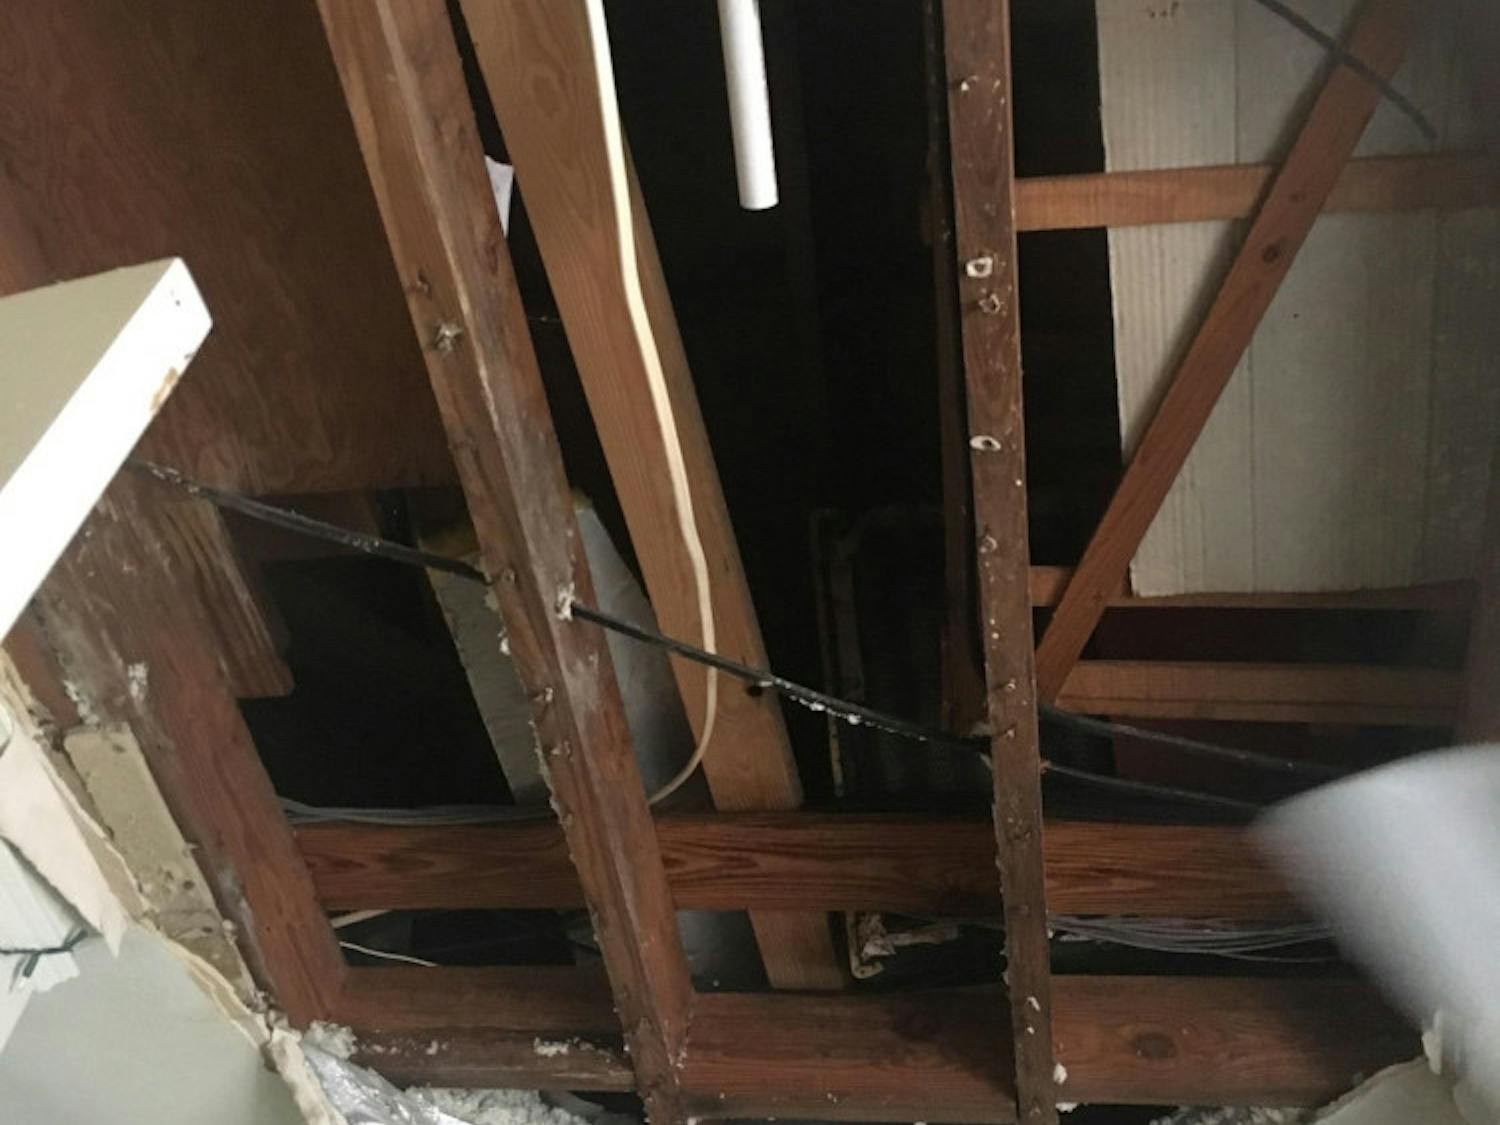 The ceiling in a bedroom at College Park Apartments collapsed Wednesday. As of Saturday, nothing had been done.